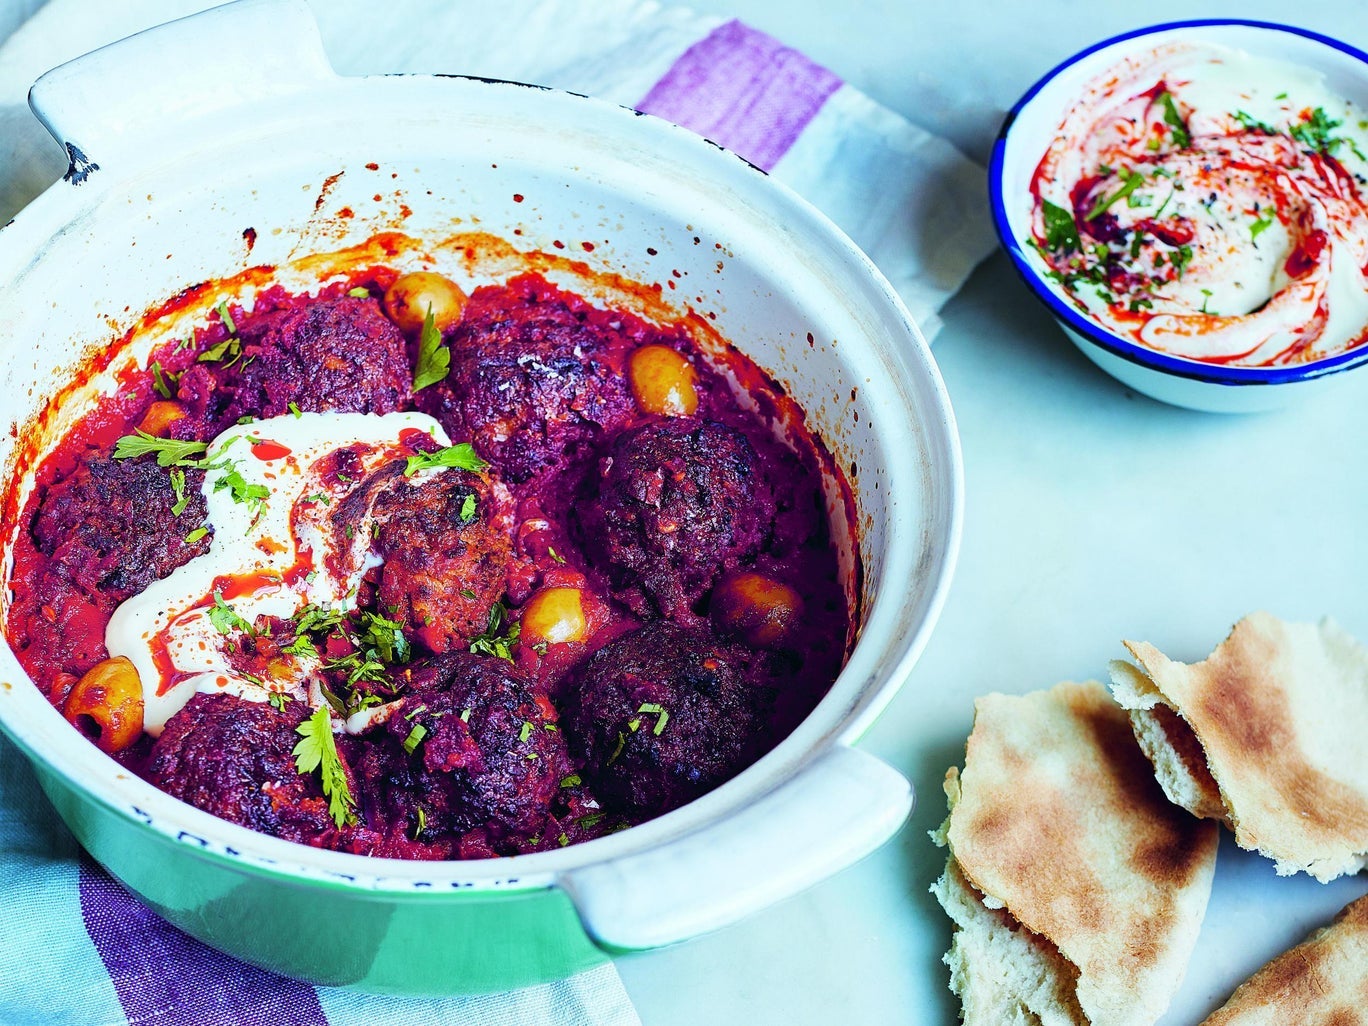 Once you try homemade falafel you’ll never want shop-bought ones again